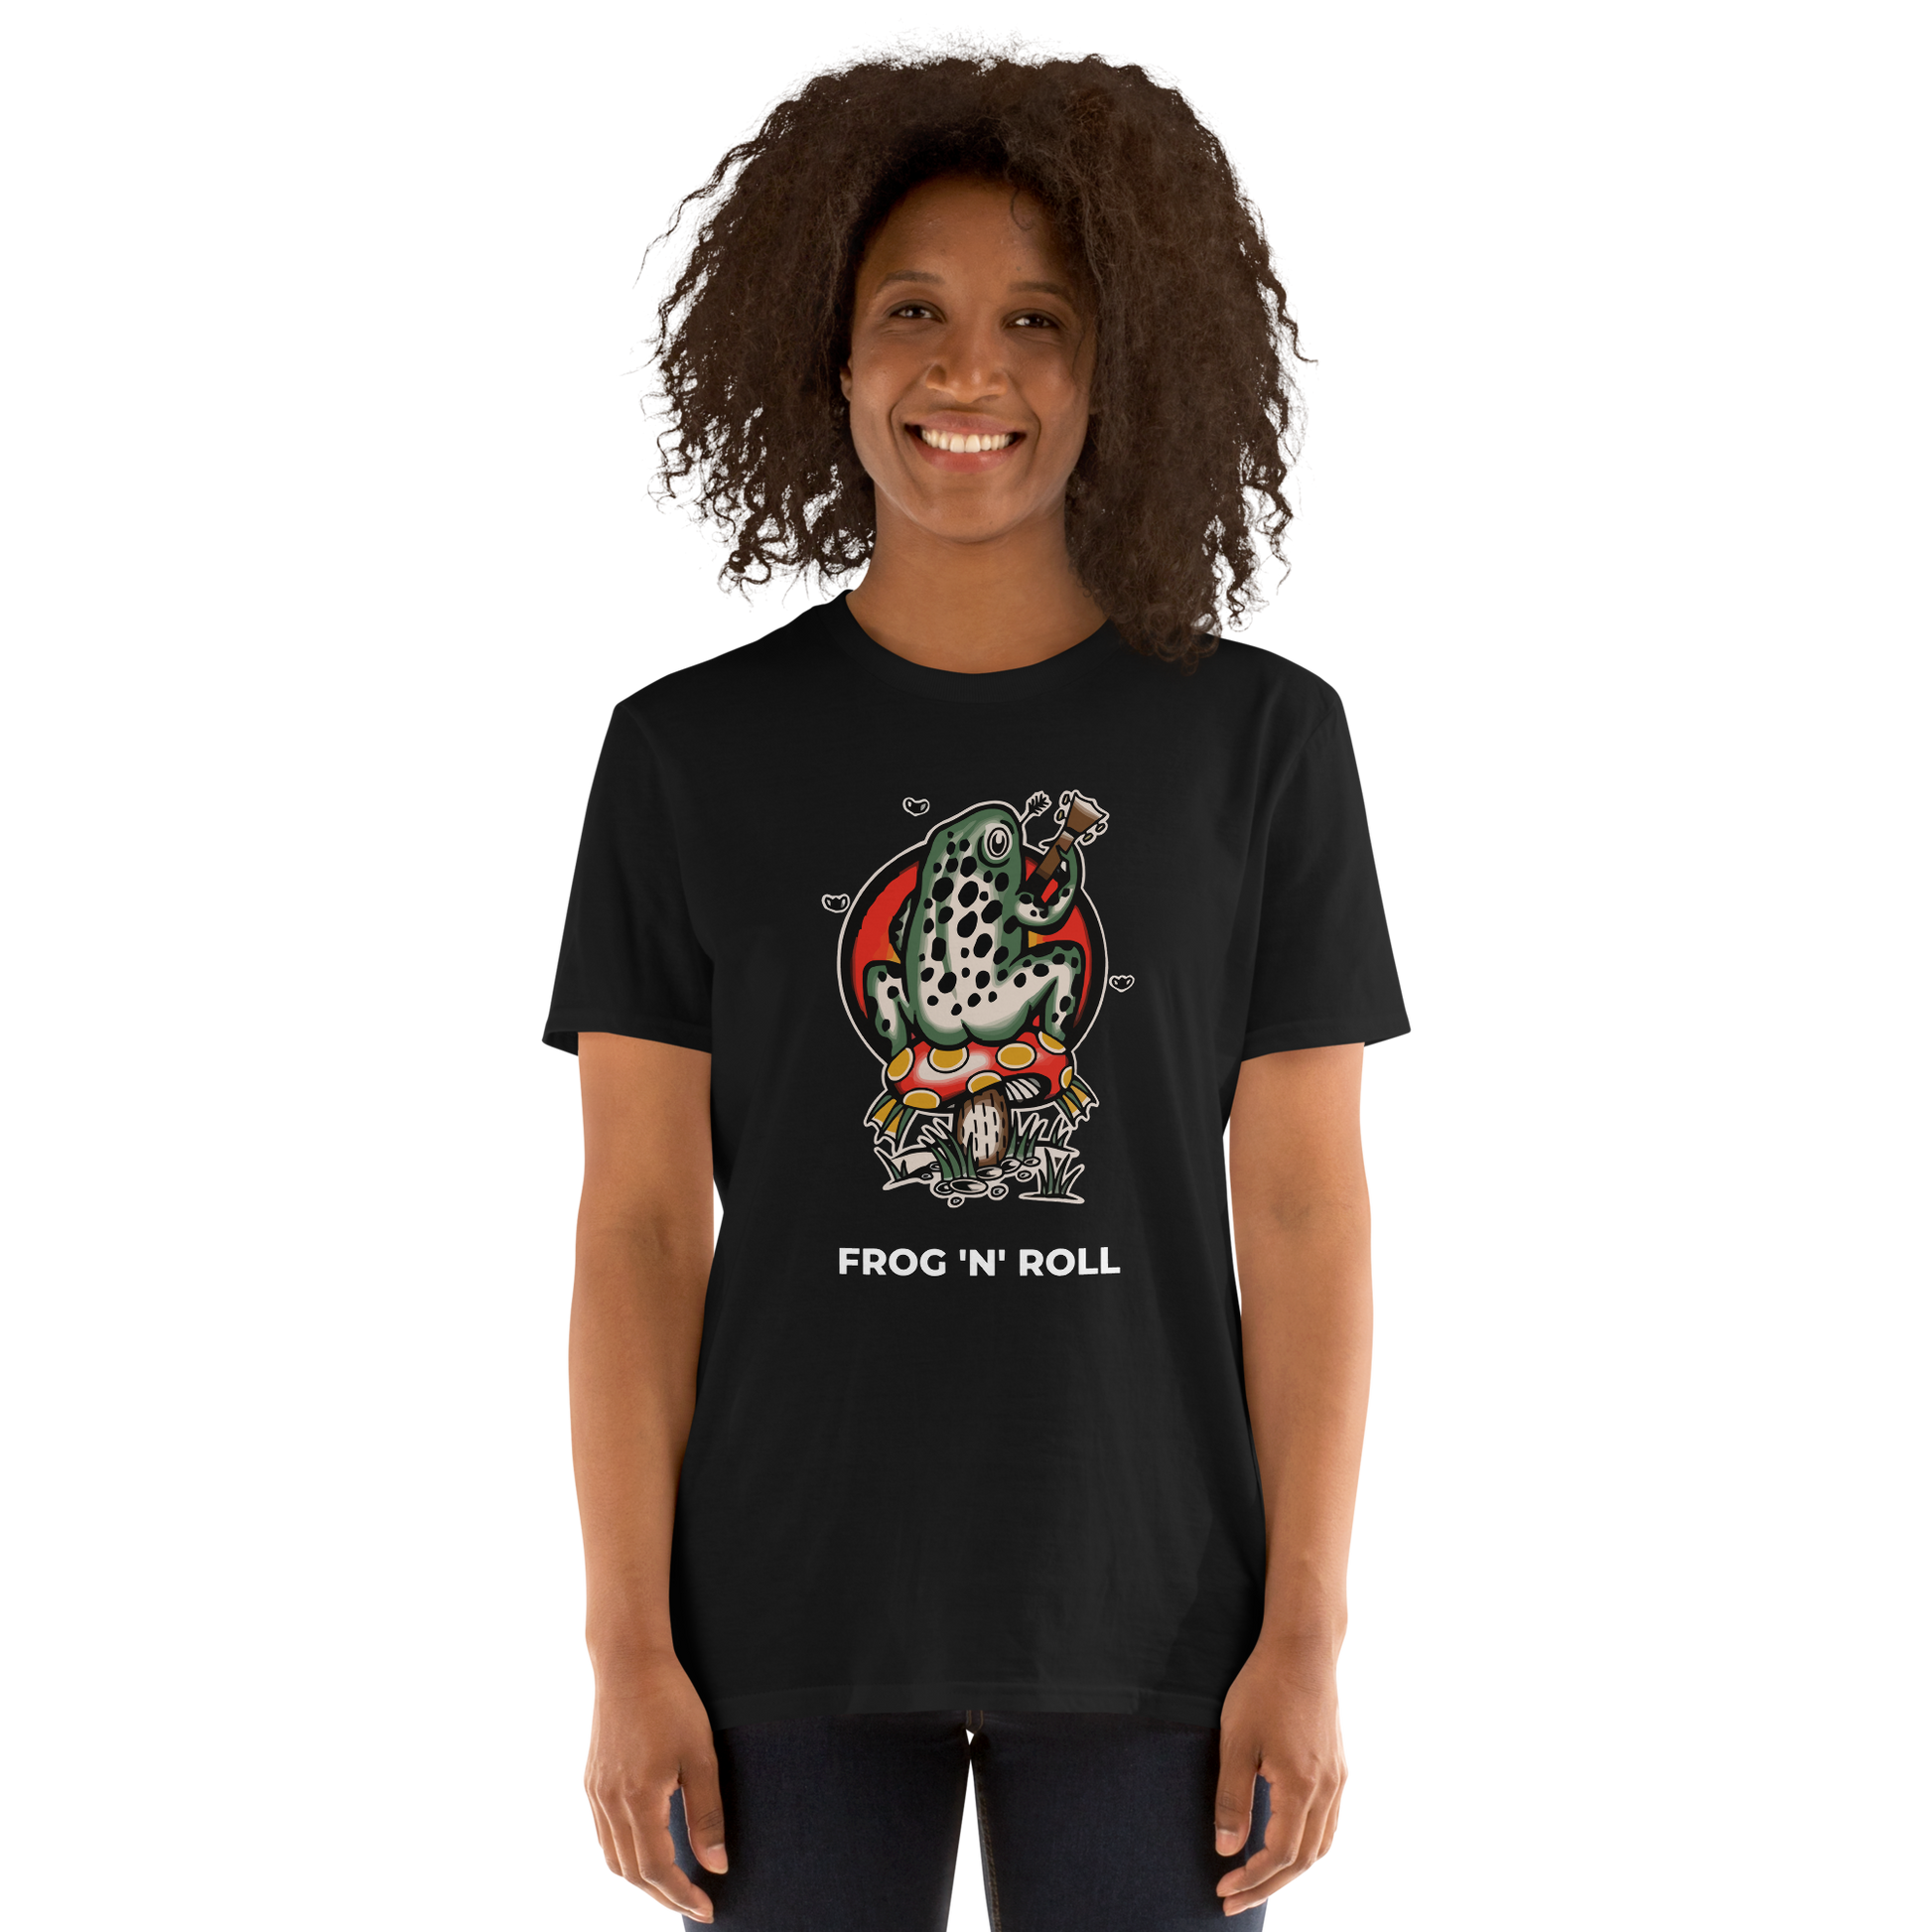 Smiling woman wearing a Black Frog T-Shirt featuring the awesome 'Frog 'n' Roll' graphic on the chest - Funny Graphic Frog T-Shirts - Boozy Fox